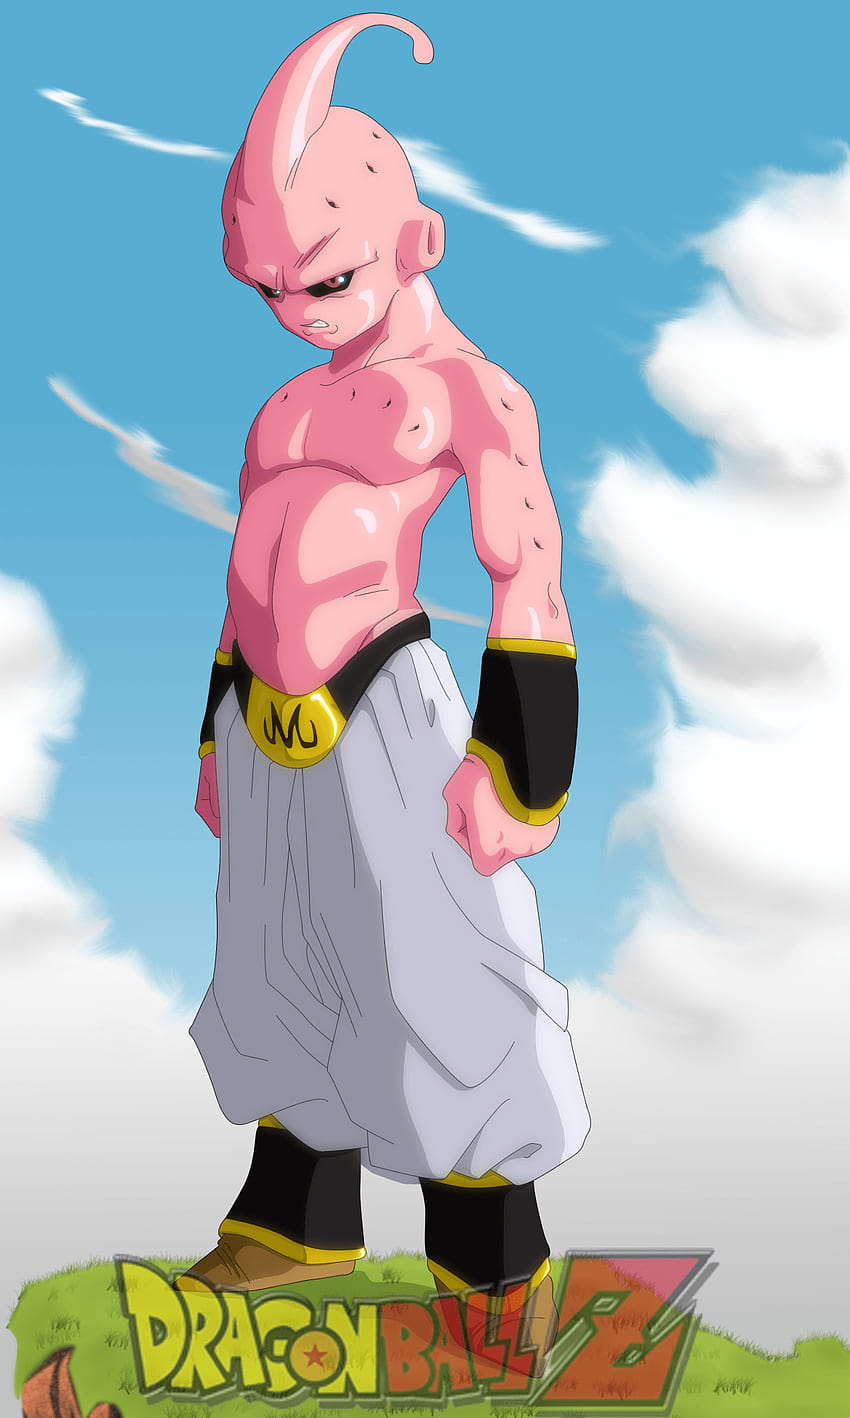 Dragon Ball Z Gt Kid Buu Backgrounds for iOS 7 HD phone wallpaper